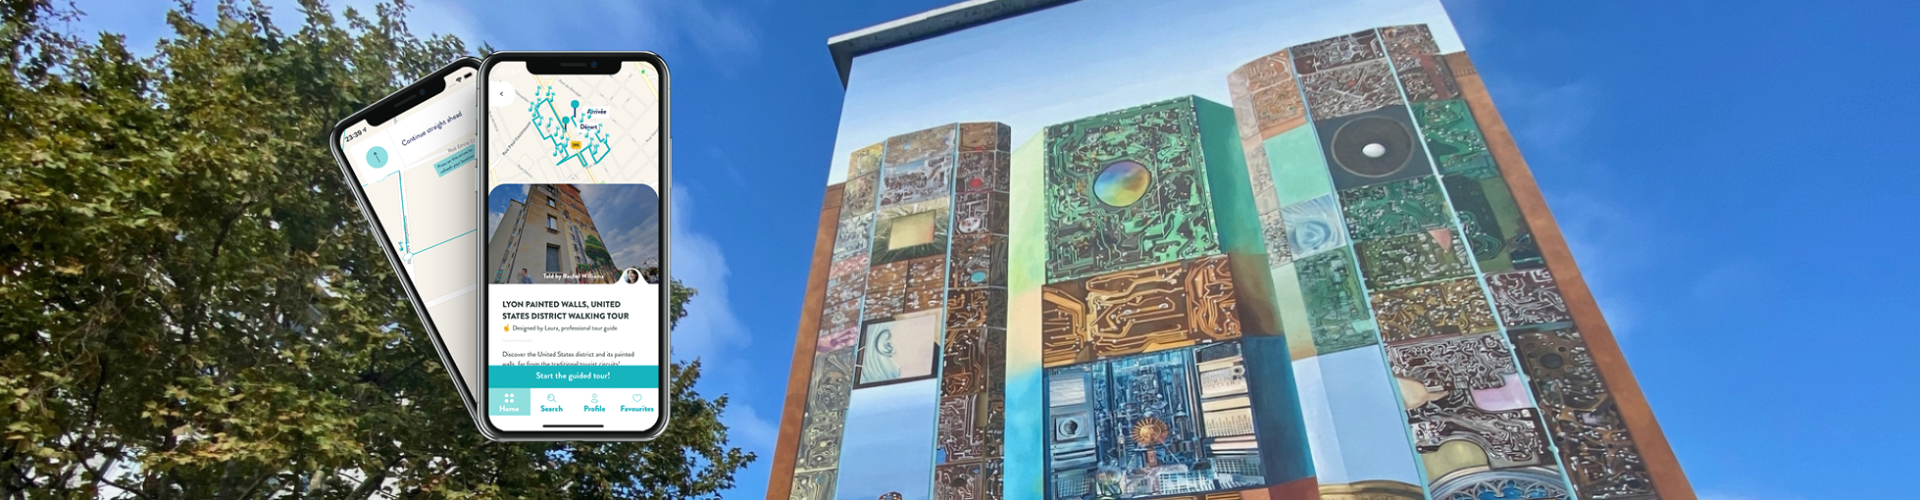 Self-guided audio tour: The Etats-Unis district and its murals 